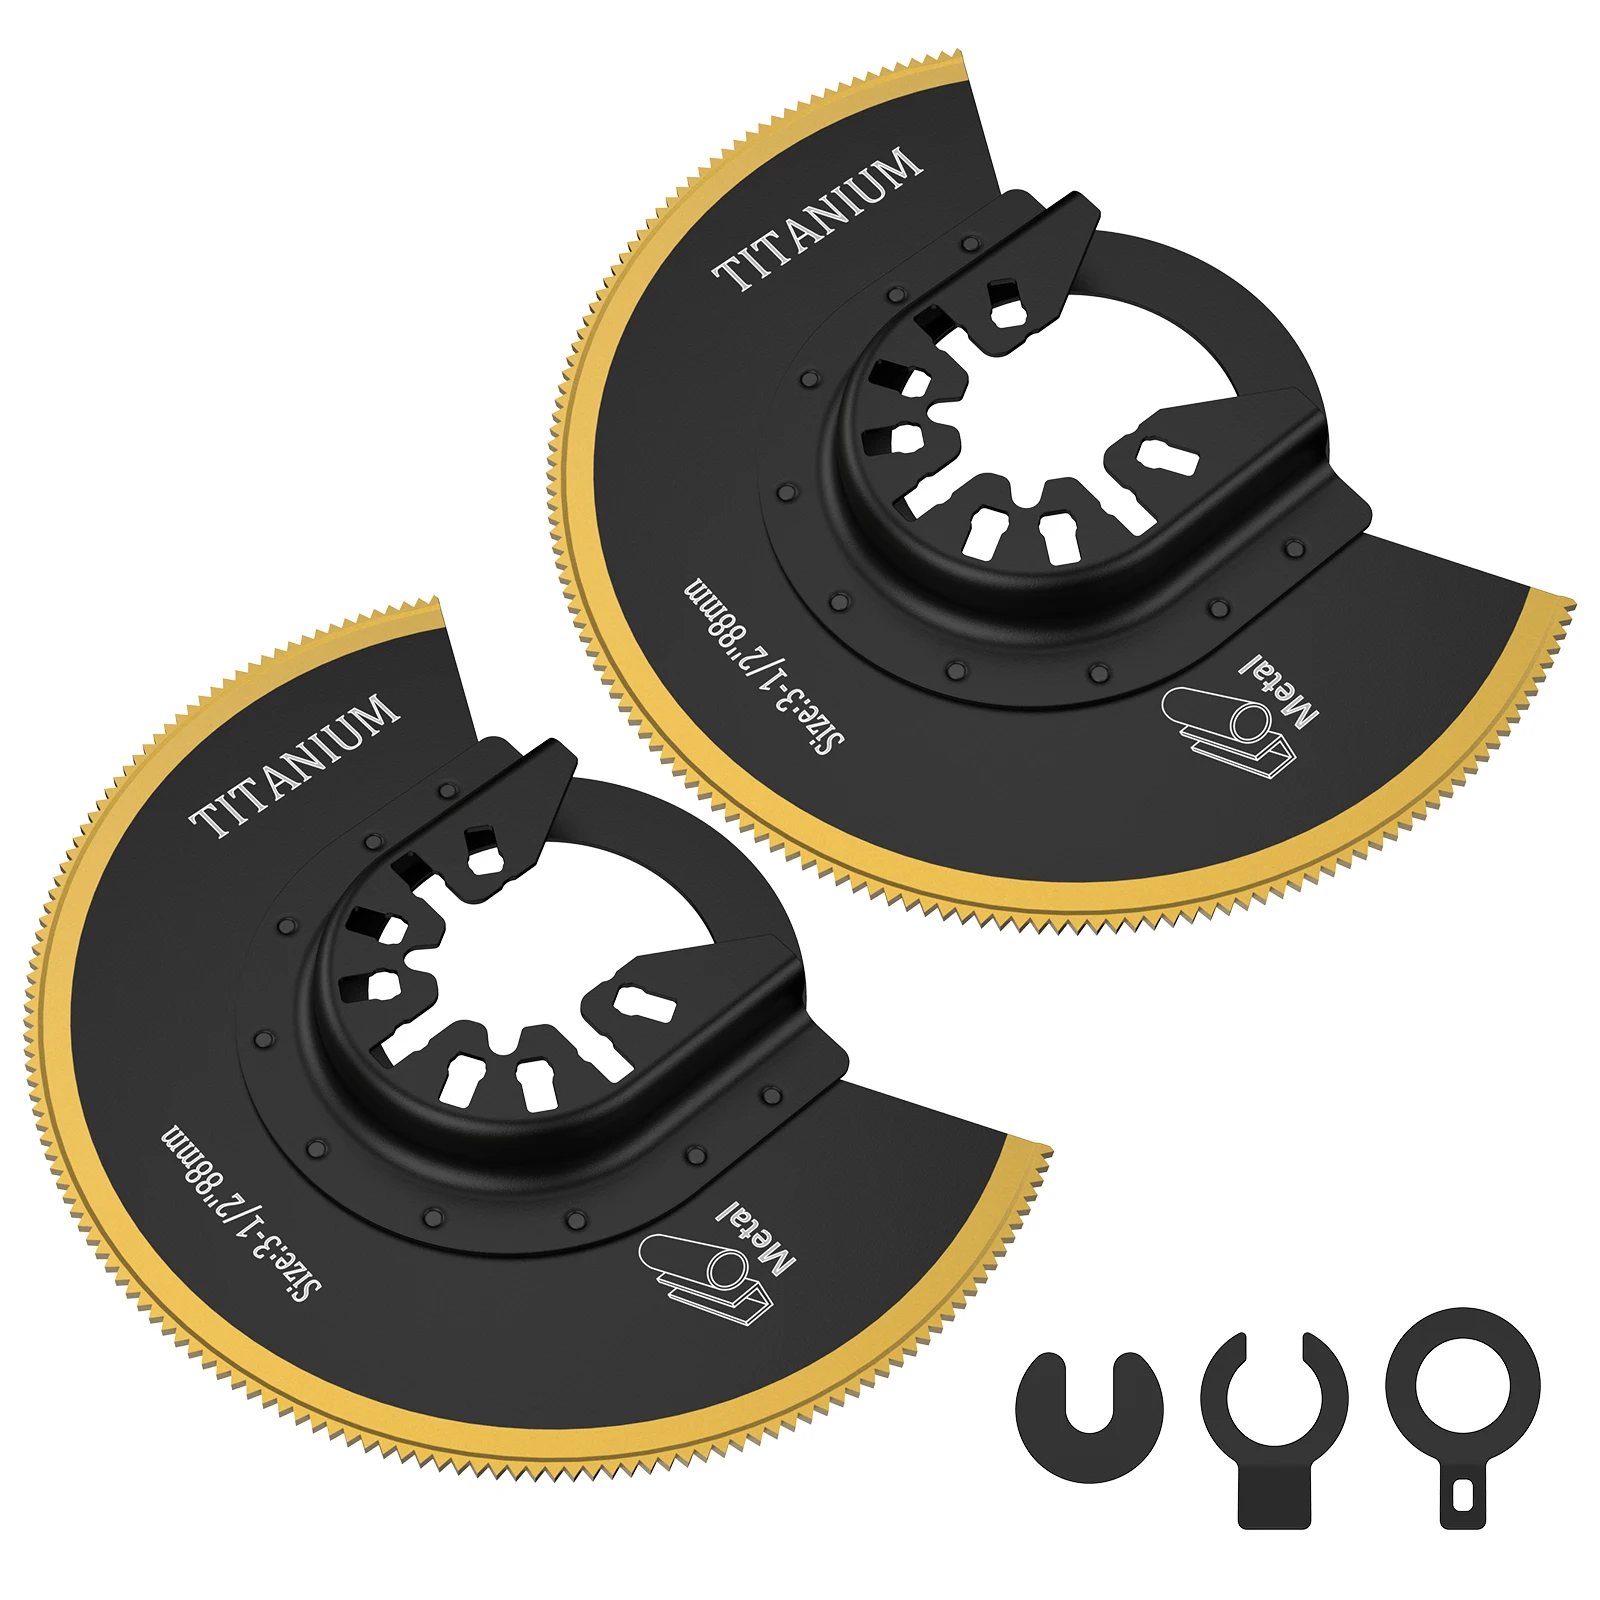 

2Pcs Oscillating Saw Blades Bi-metal Titanium Coated Multitool Blades with Gasket Adapters for Wood Plastic Metal Cutting